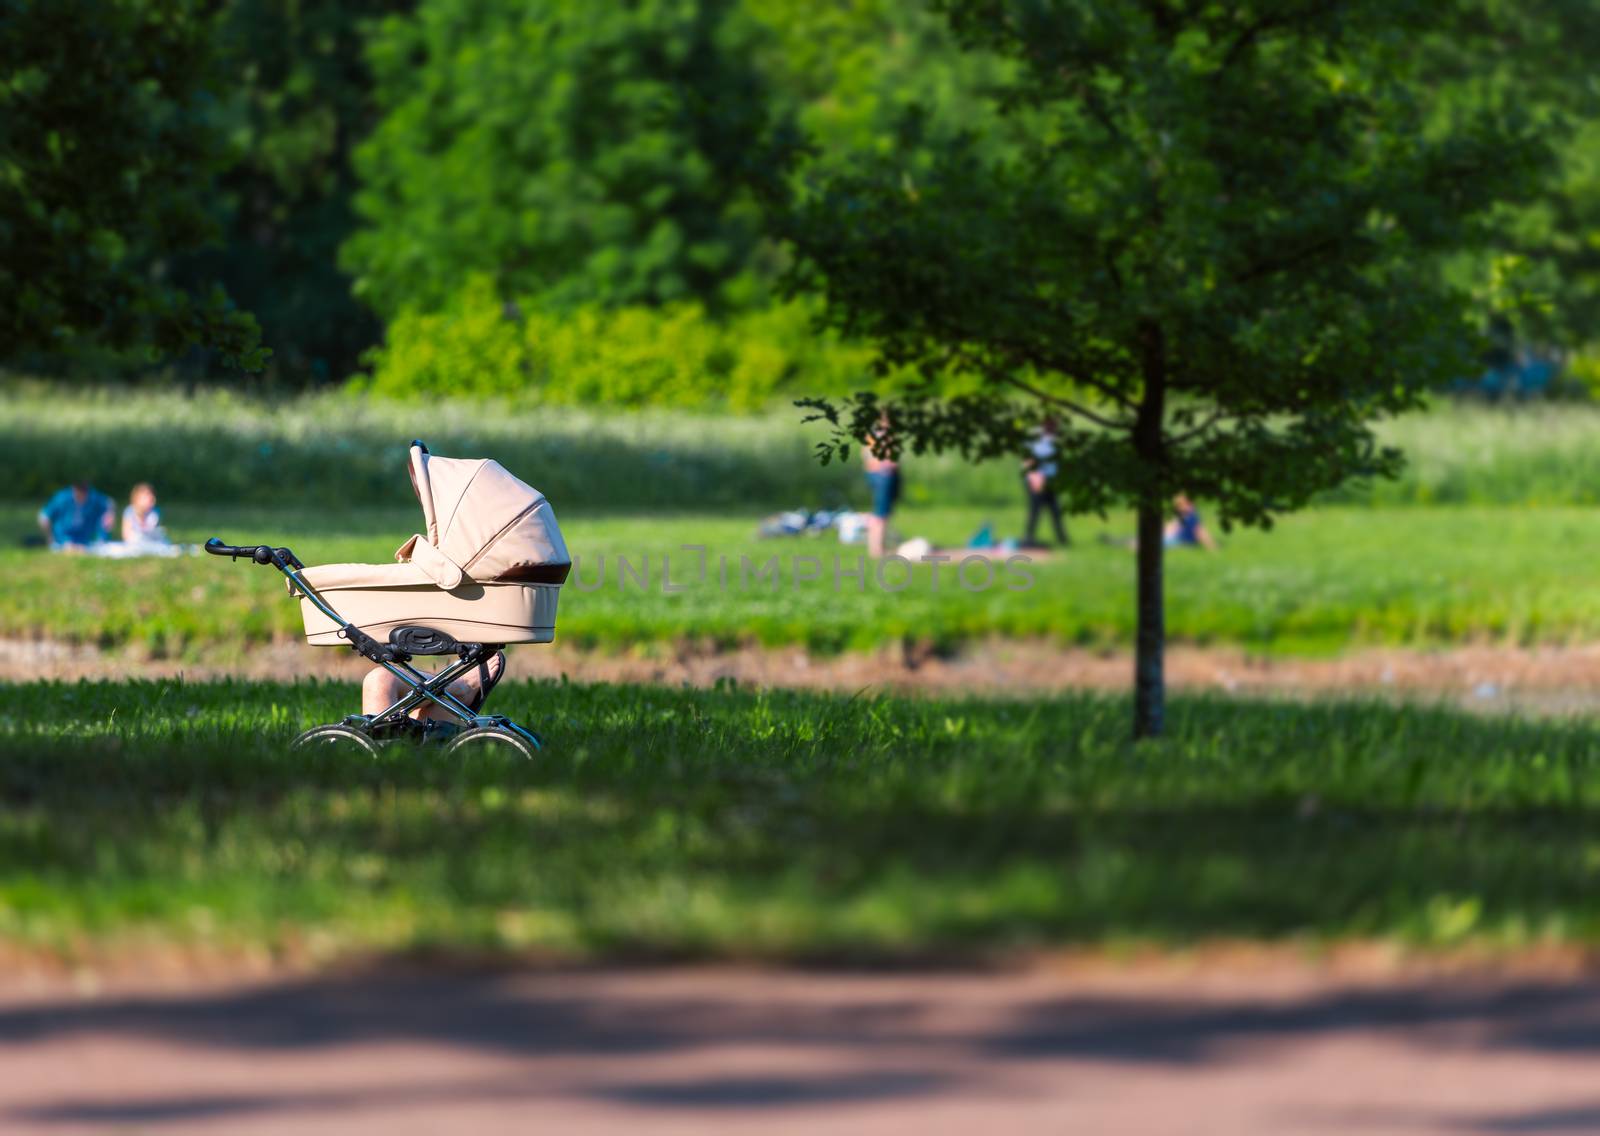 Baby carriage in park with parent nearby. People relax in city green zone.